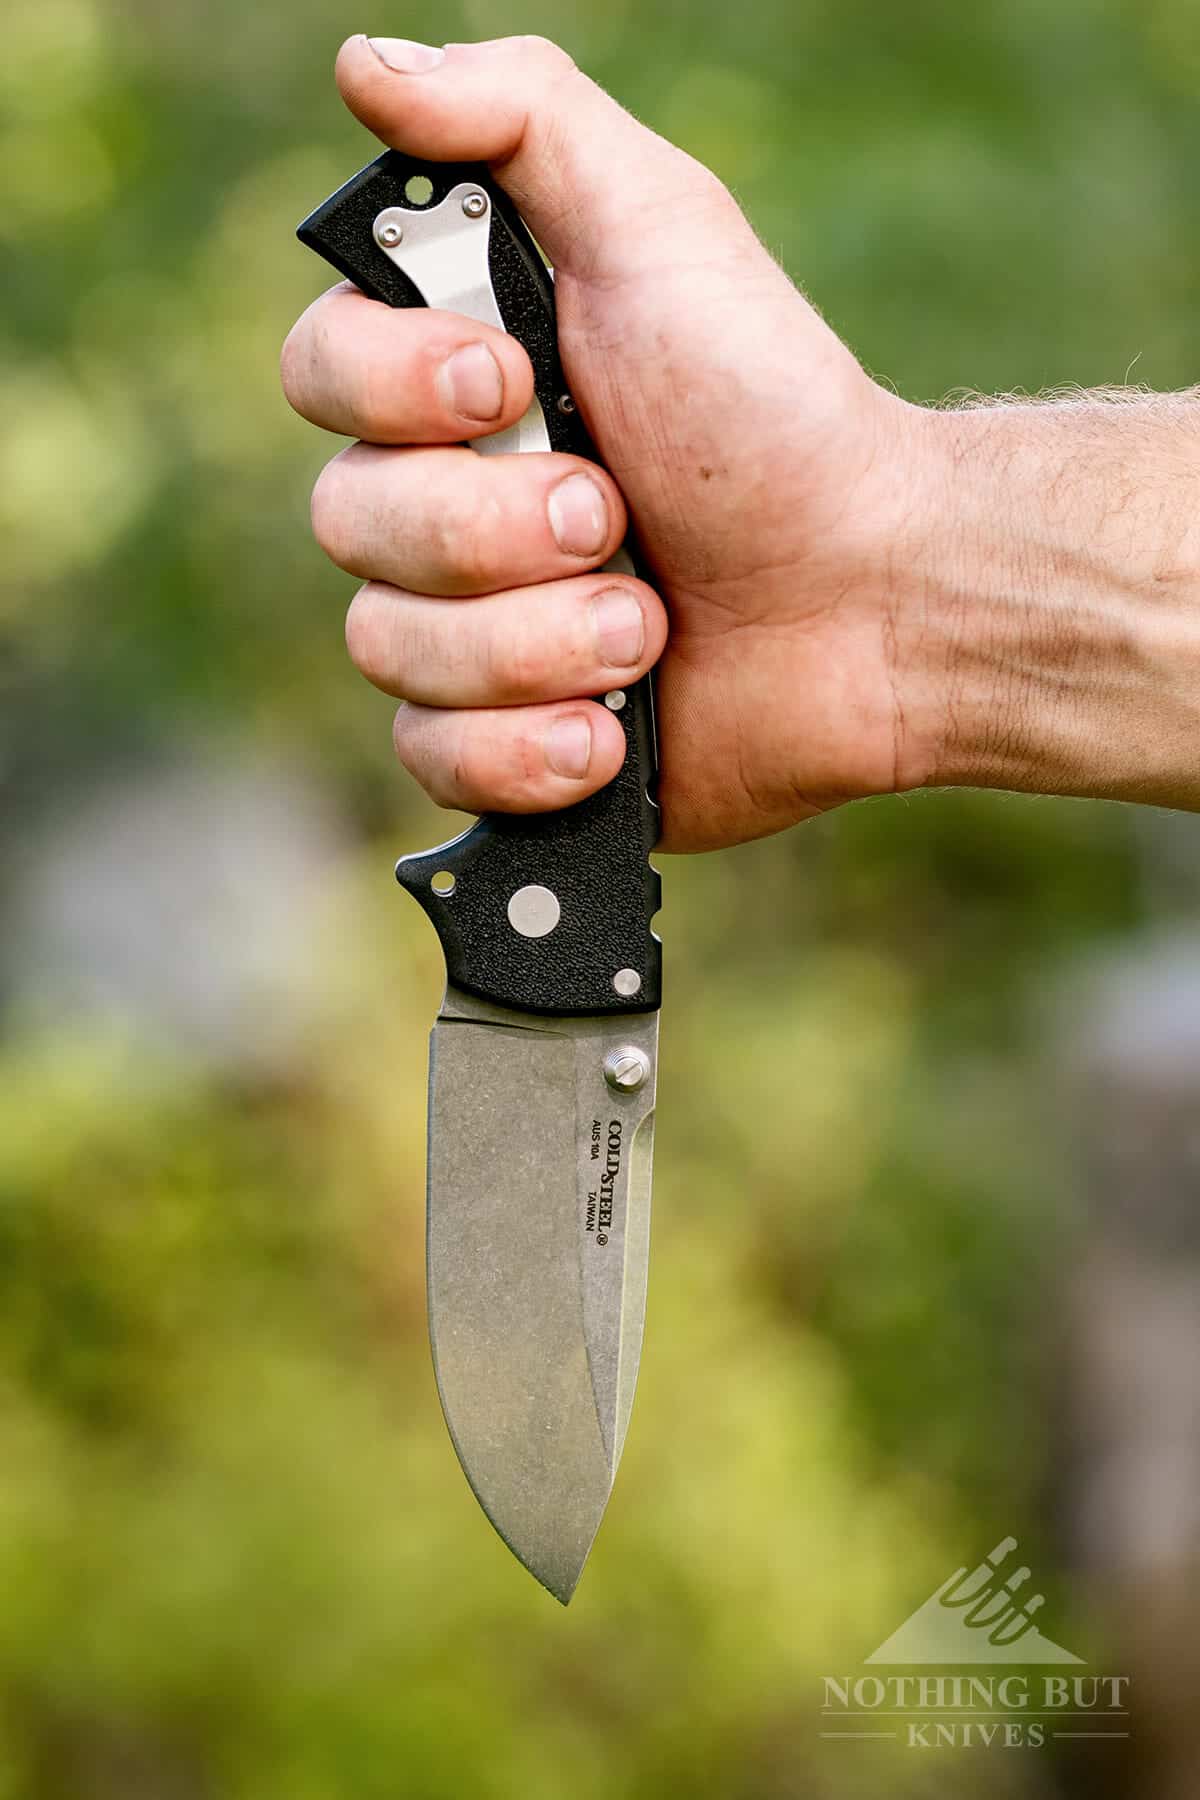 The handle design of this knife makes reverse grip easy and comfortable.